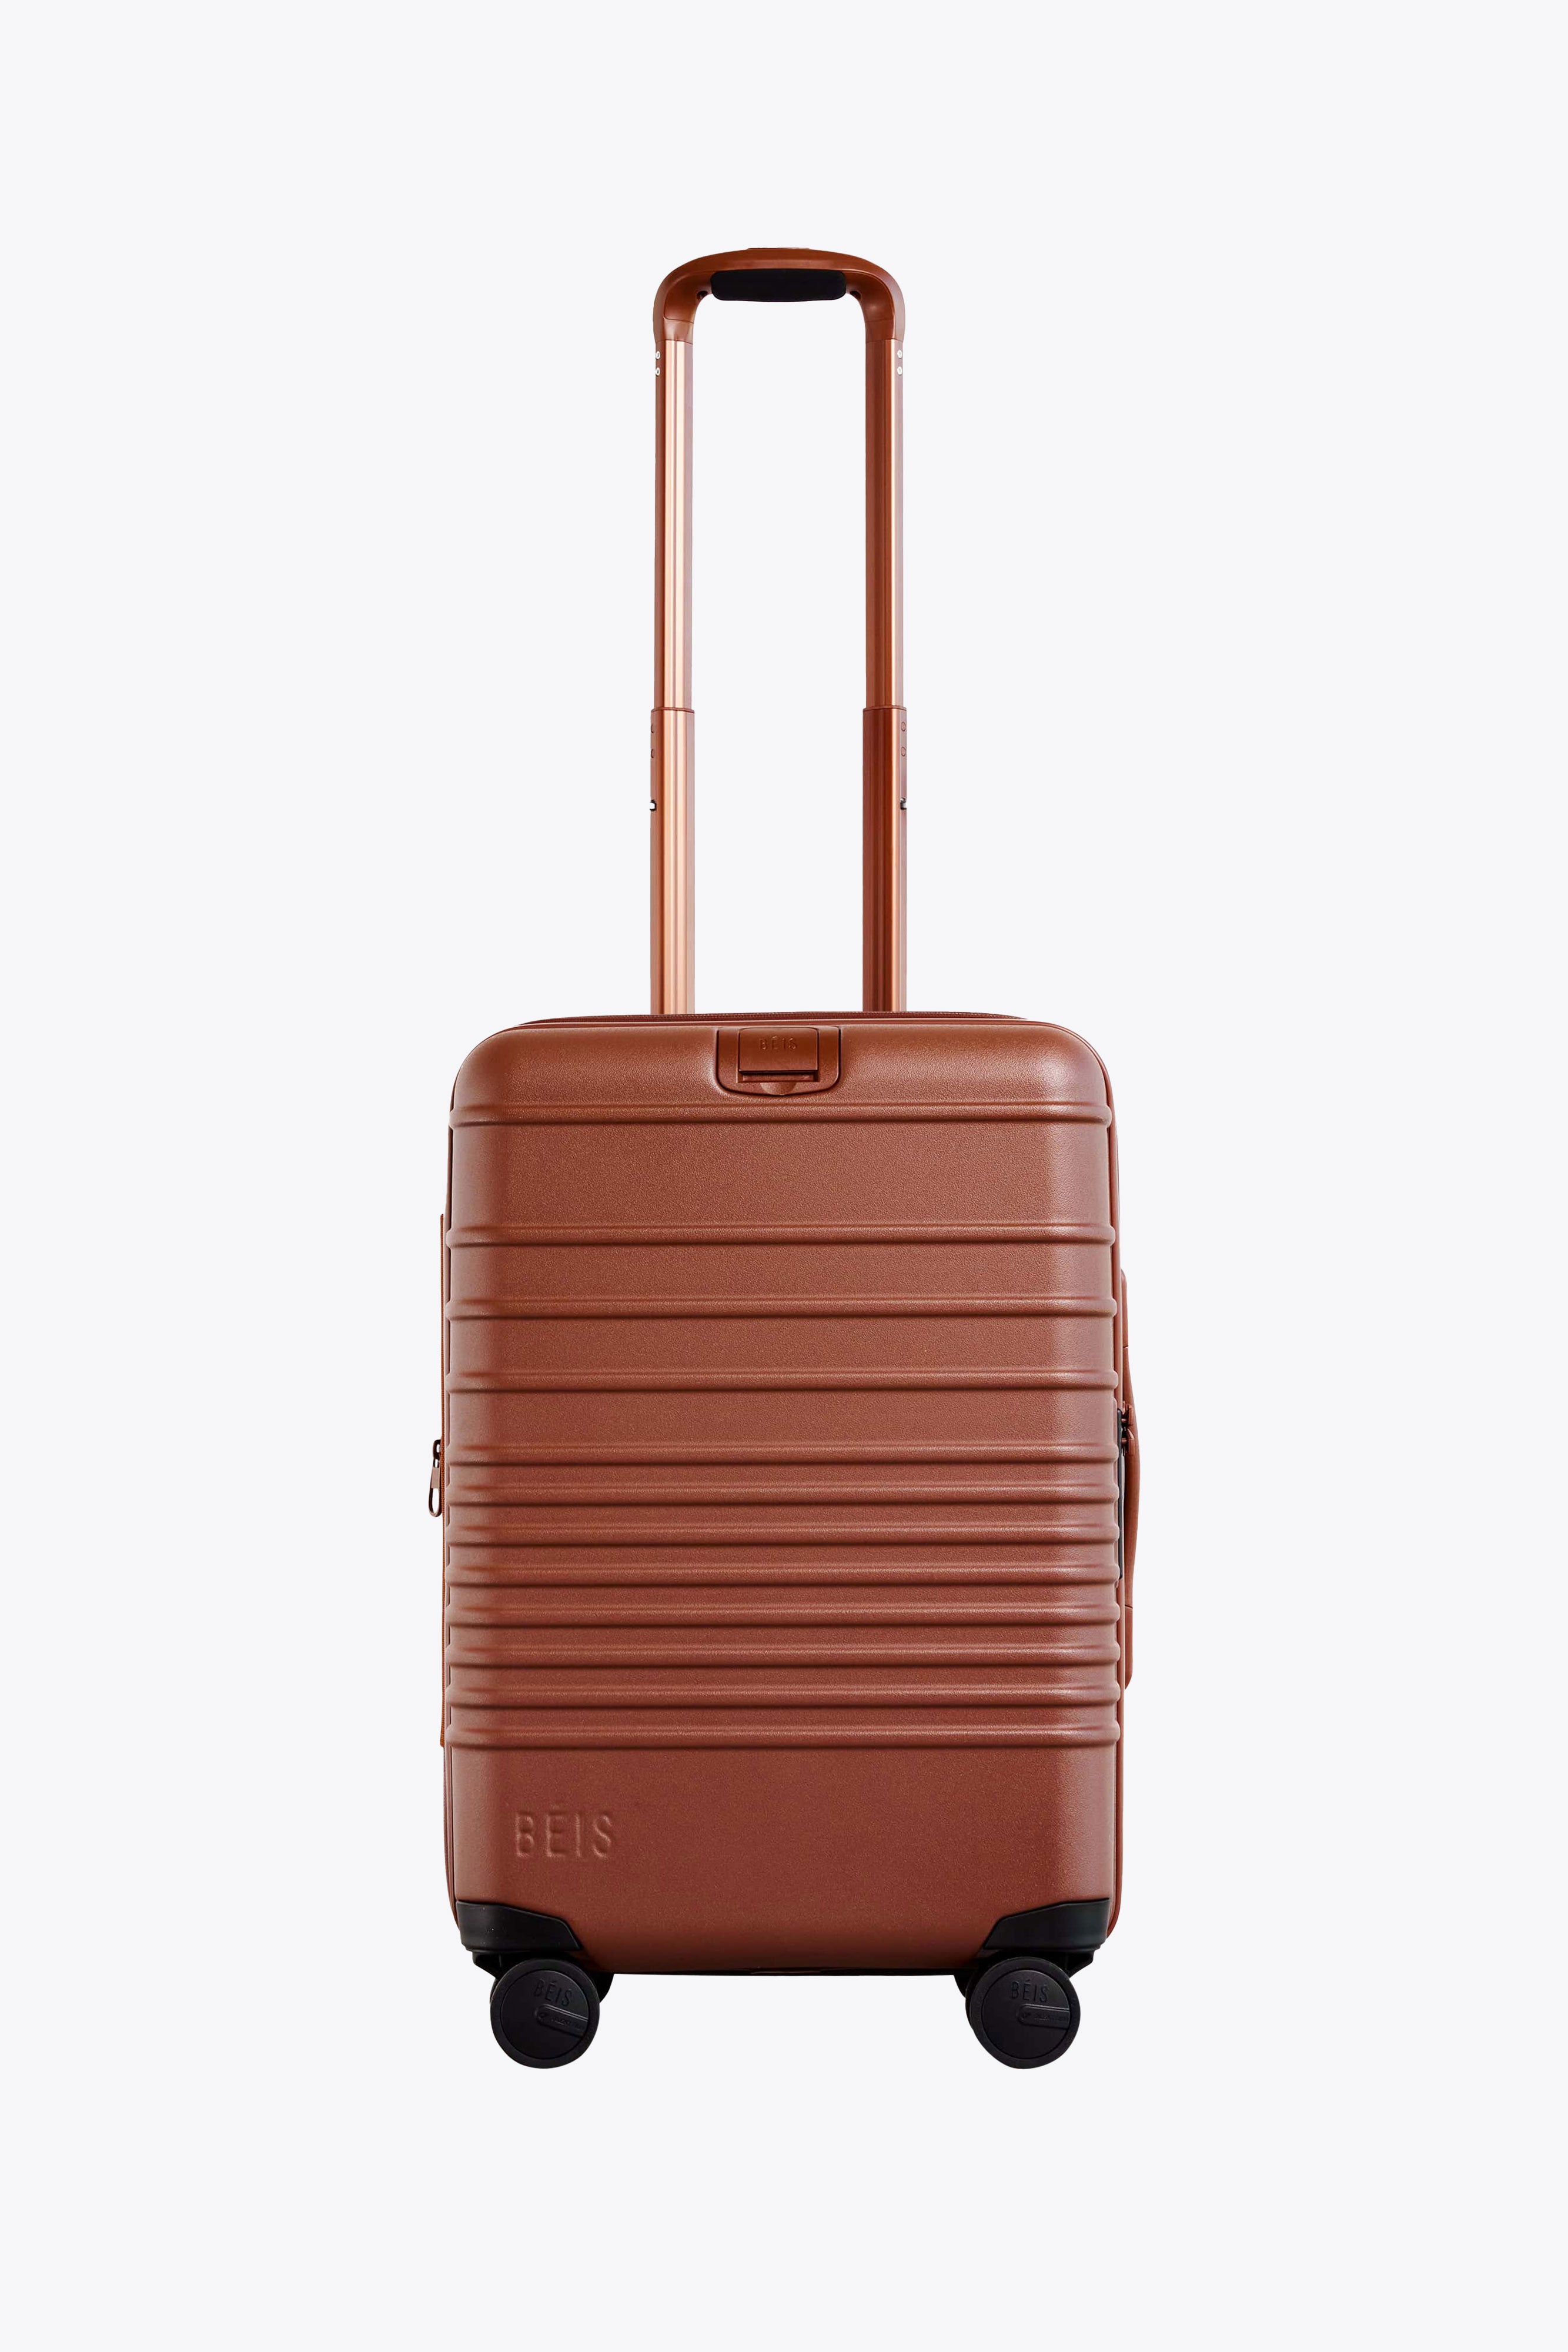 The Best of Béis: Suitcases, Weekenders, and Travel Accessories We Love |  Condé Nast Traveler